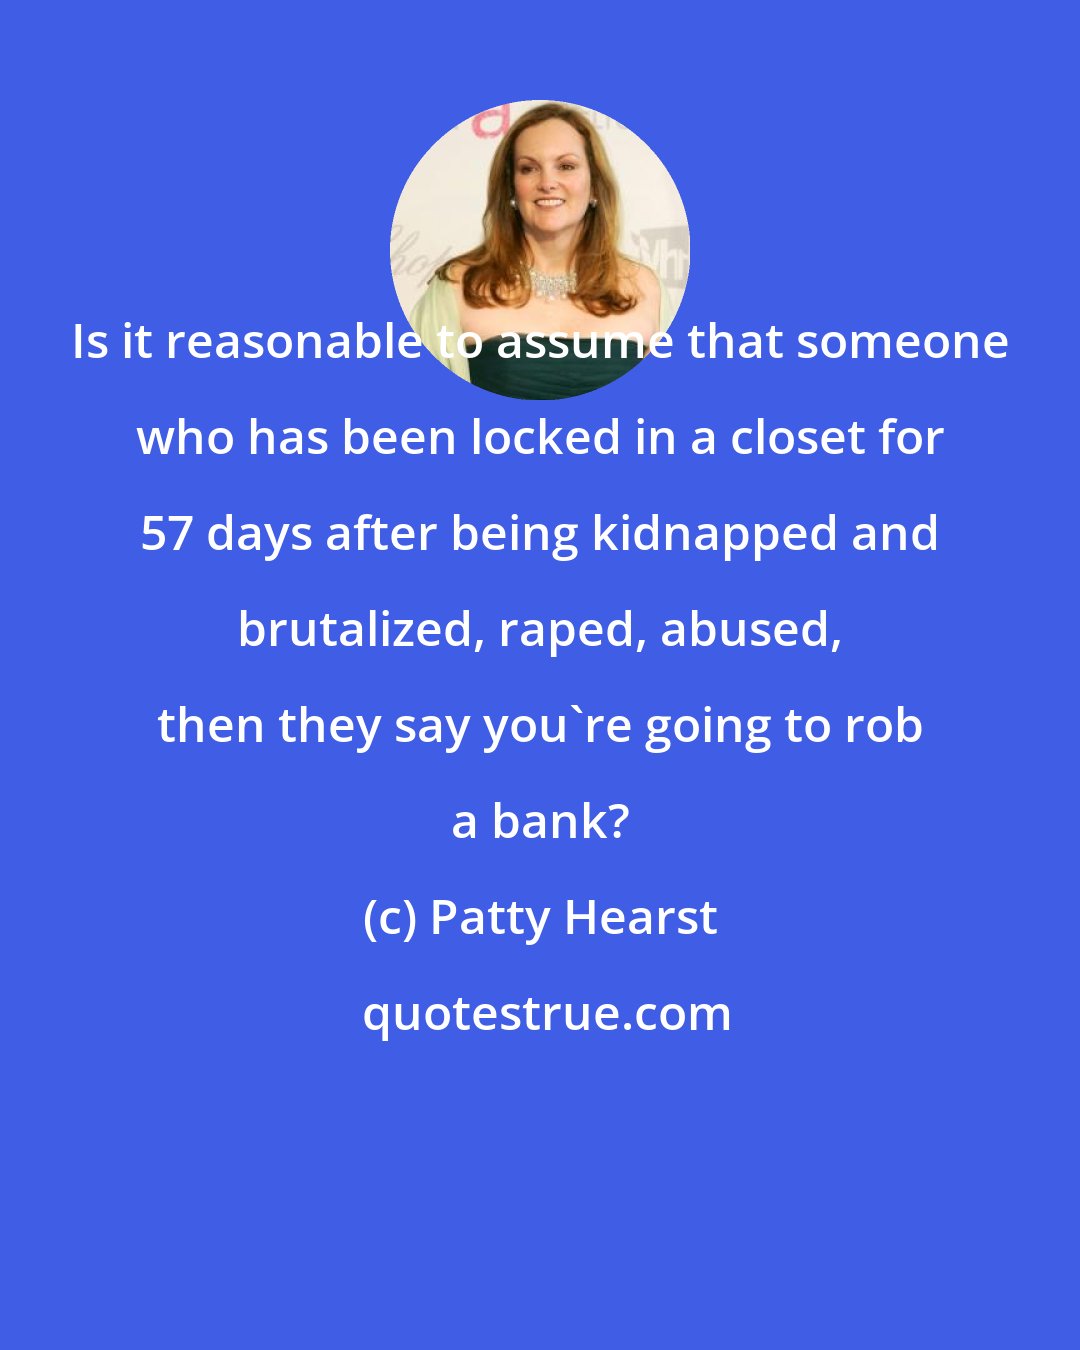 Patty Hearst: Is it reasonable to assume that someone who has been locked in a closet for 57 days after being kidnapped and brutalized, raped, abused, then they say you're going to rob a bank?